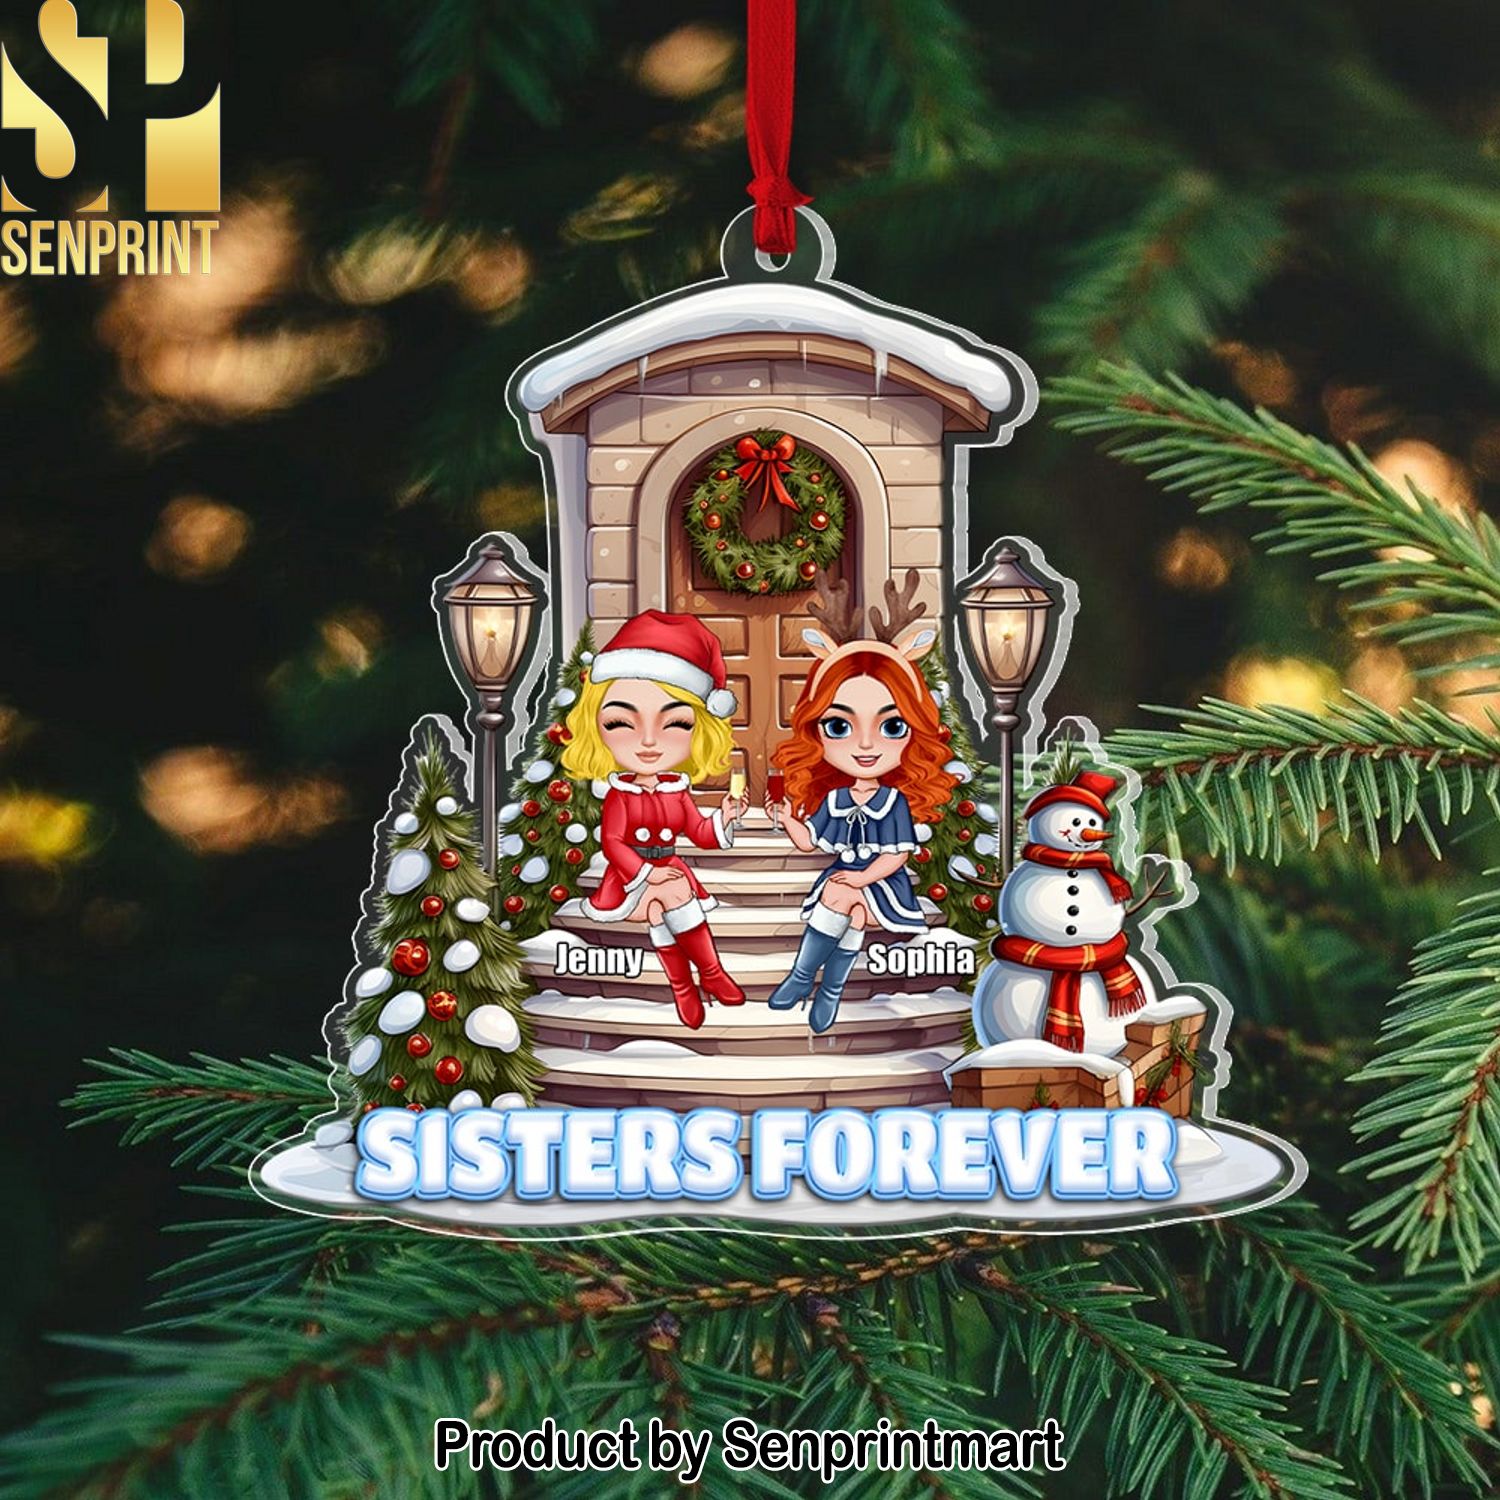 Friendship, Sisters Forever, Personalized Ornament, Christmas Gifts For Friends